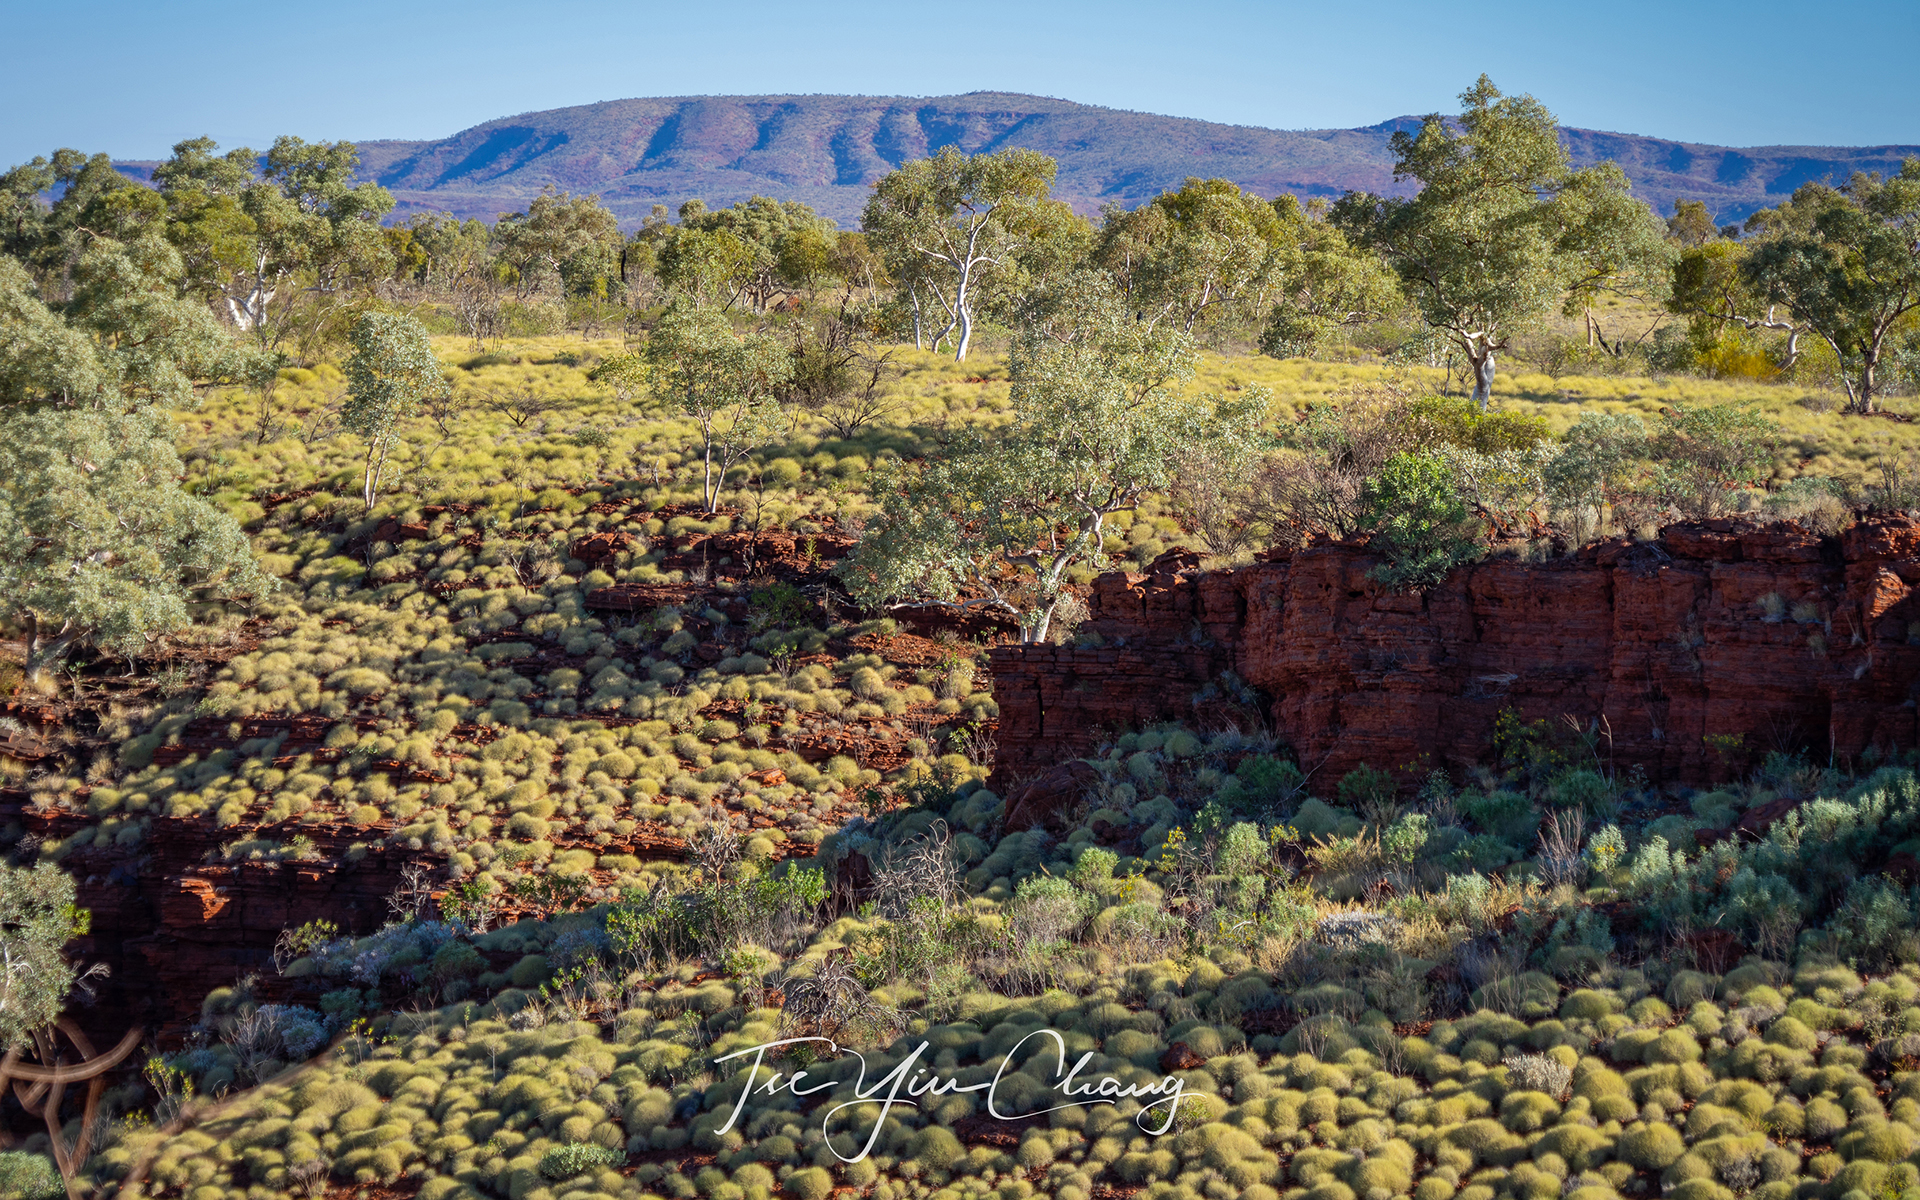 The hemispherical appearance of Spinifex covering the hills gave the Pilbara landscape the iconic hummocky look, Weano Gorge